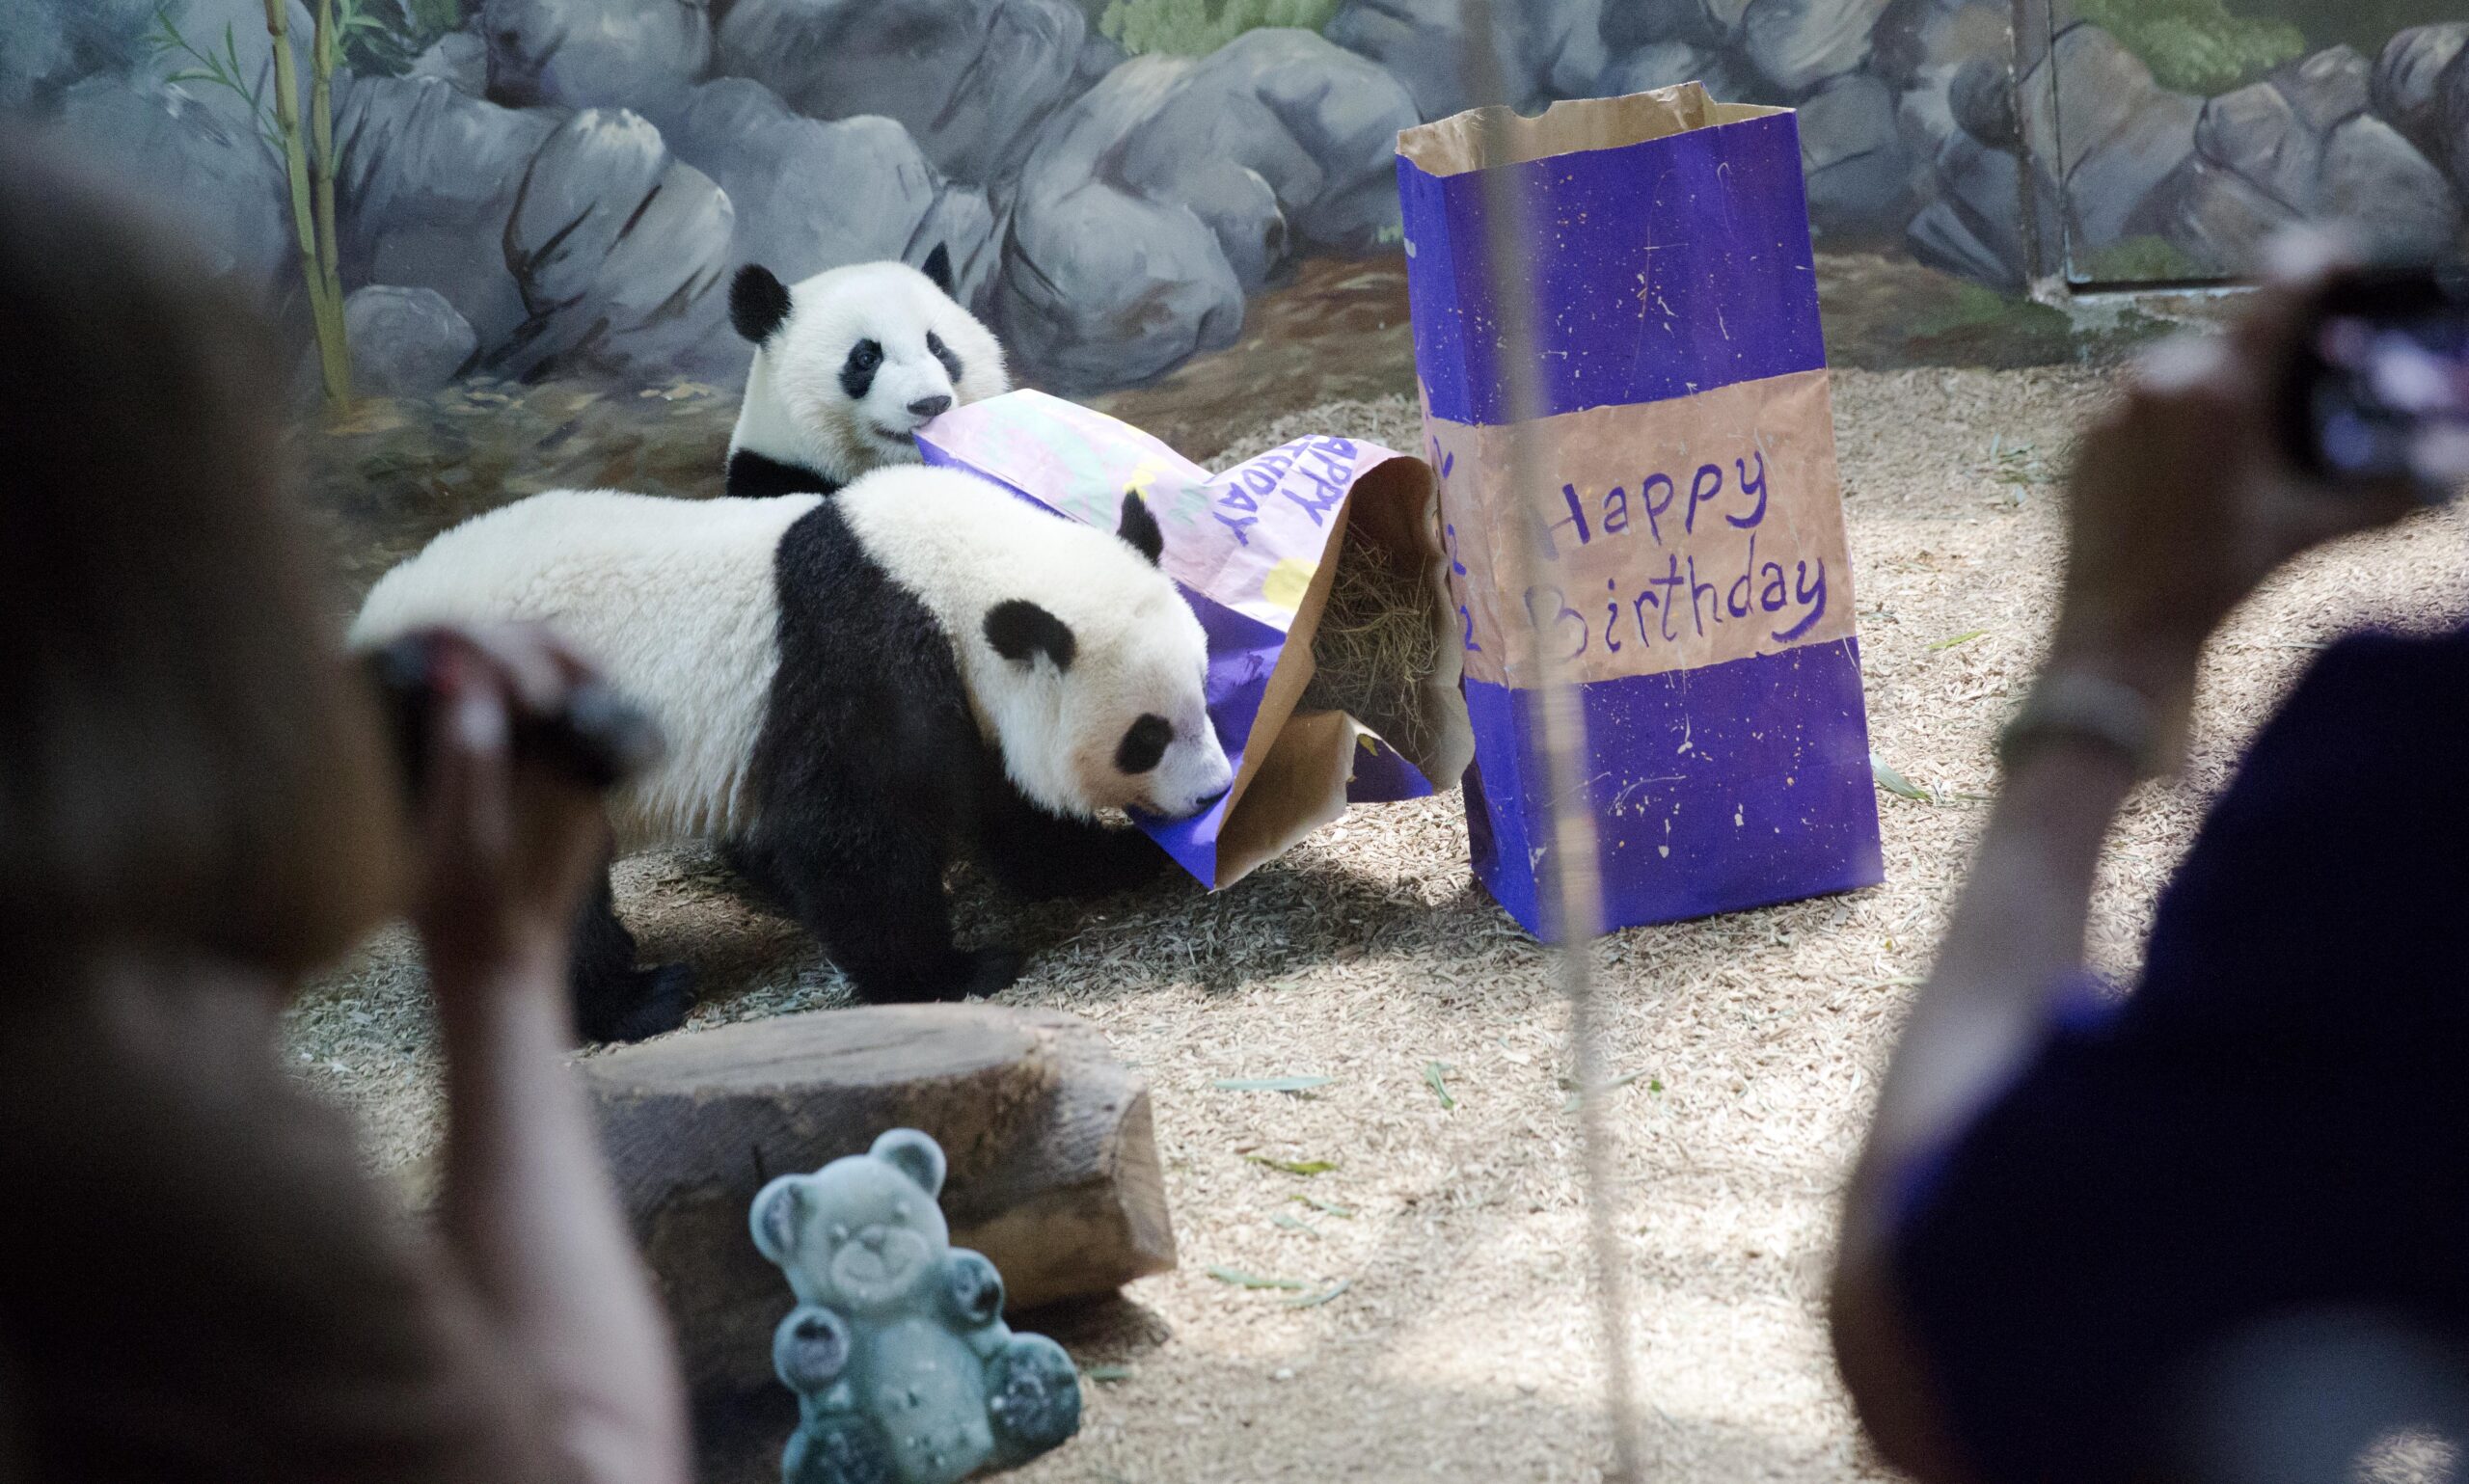 Pandas could be gone from America's zoos by the end of next year